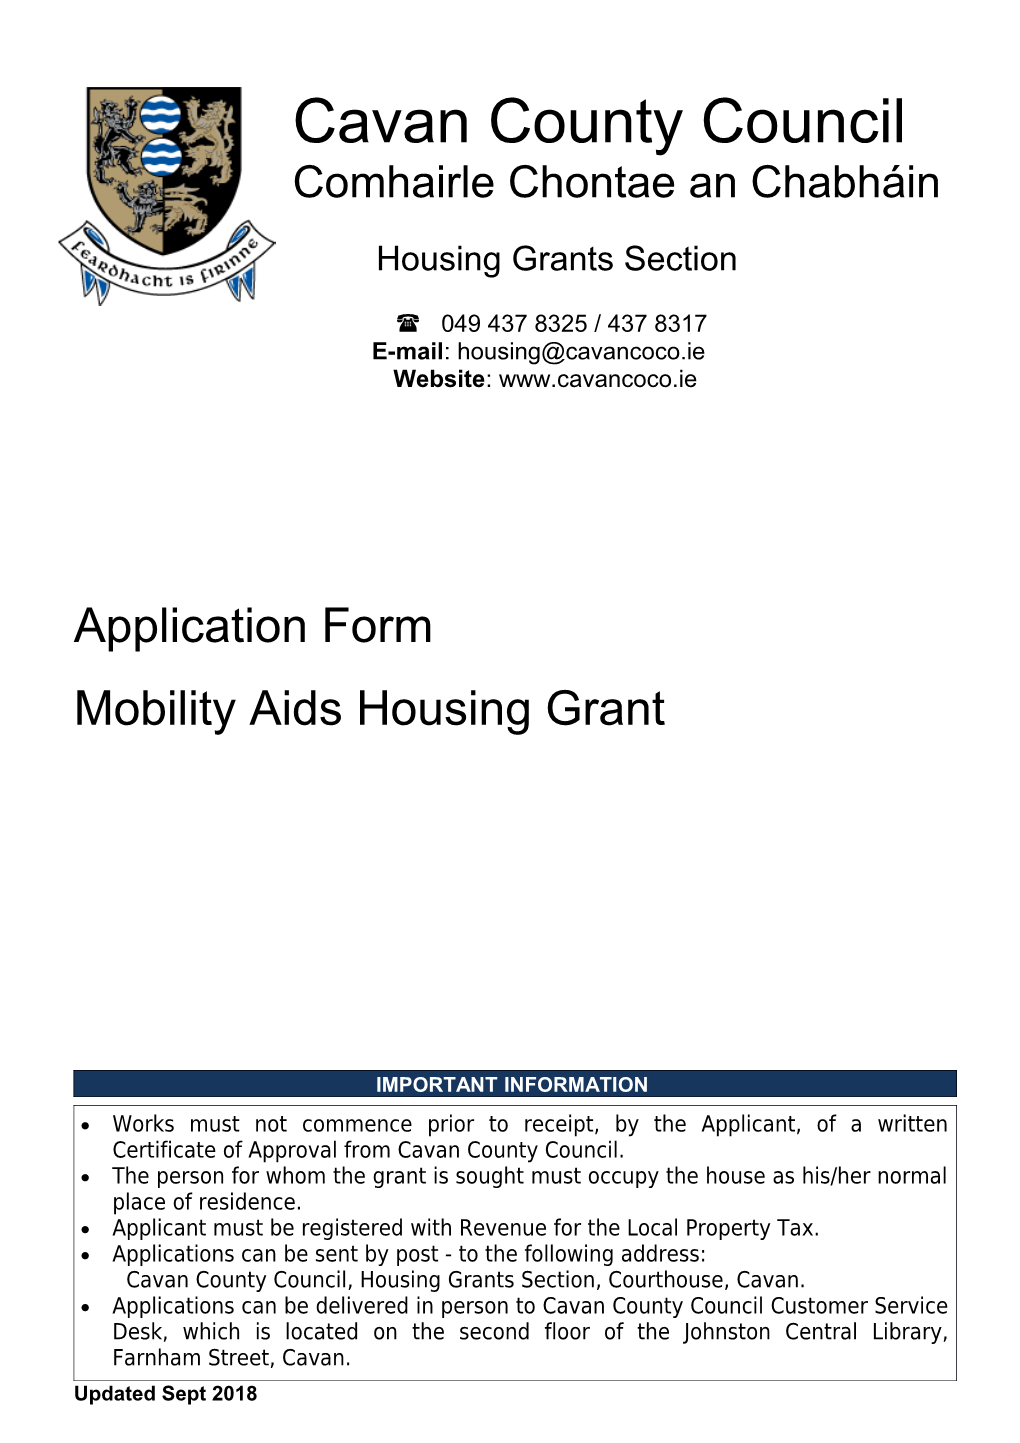 Mobility Aids Housing Grant